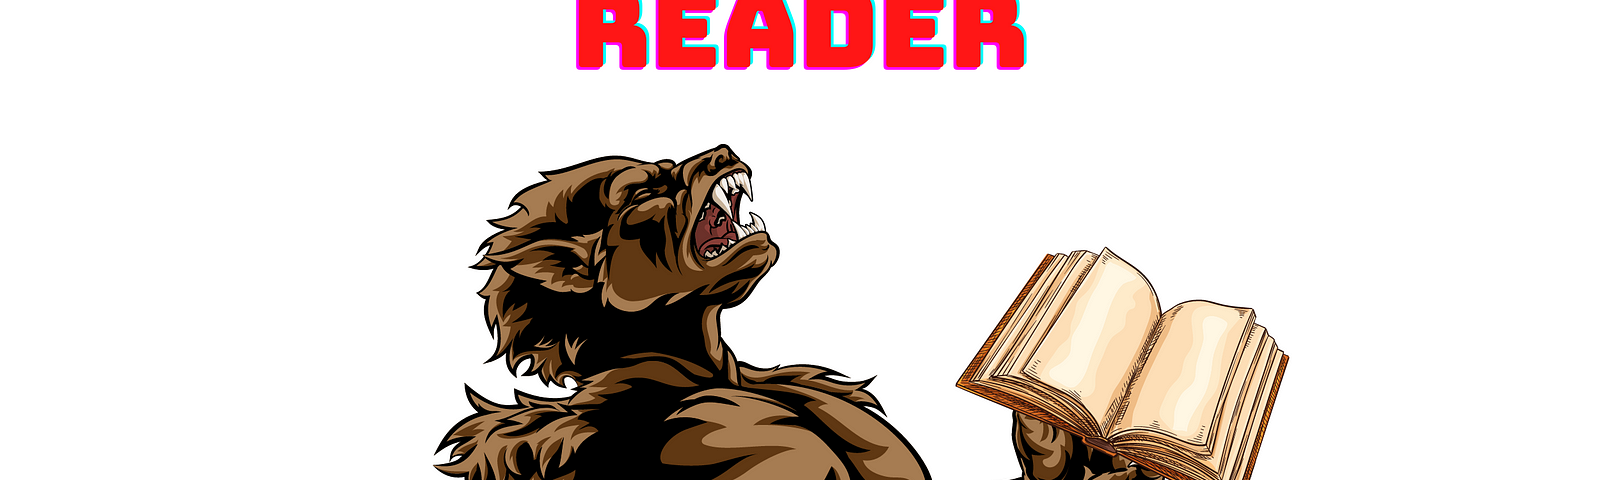 werewolf holding book and roaring